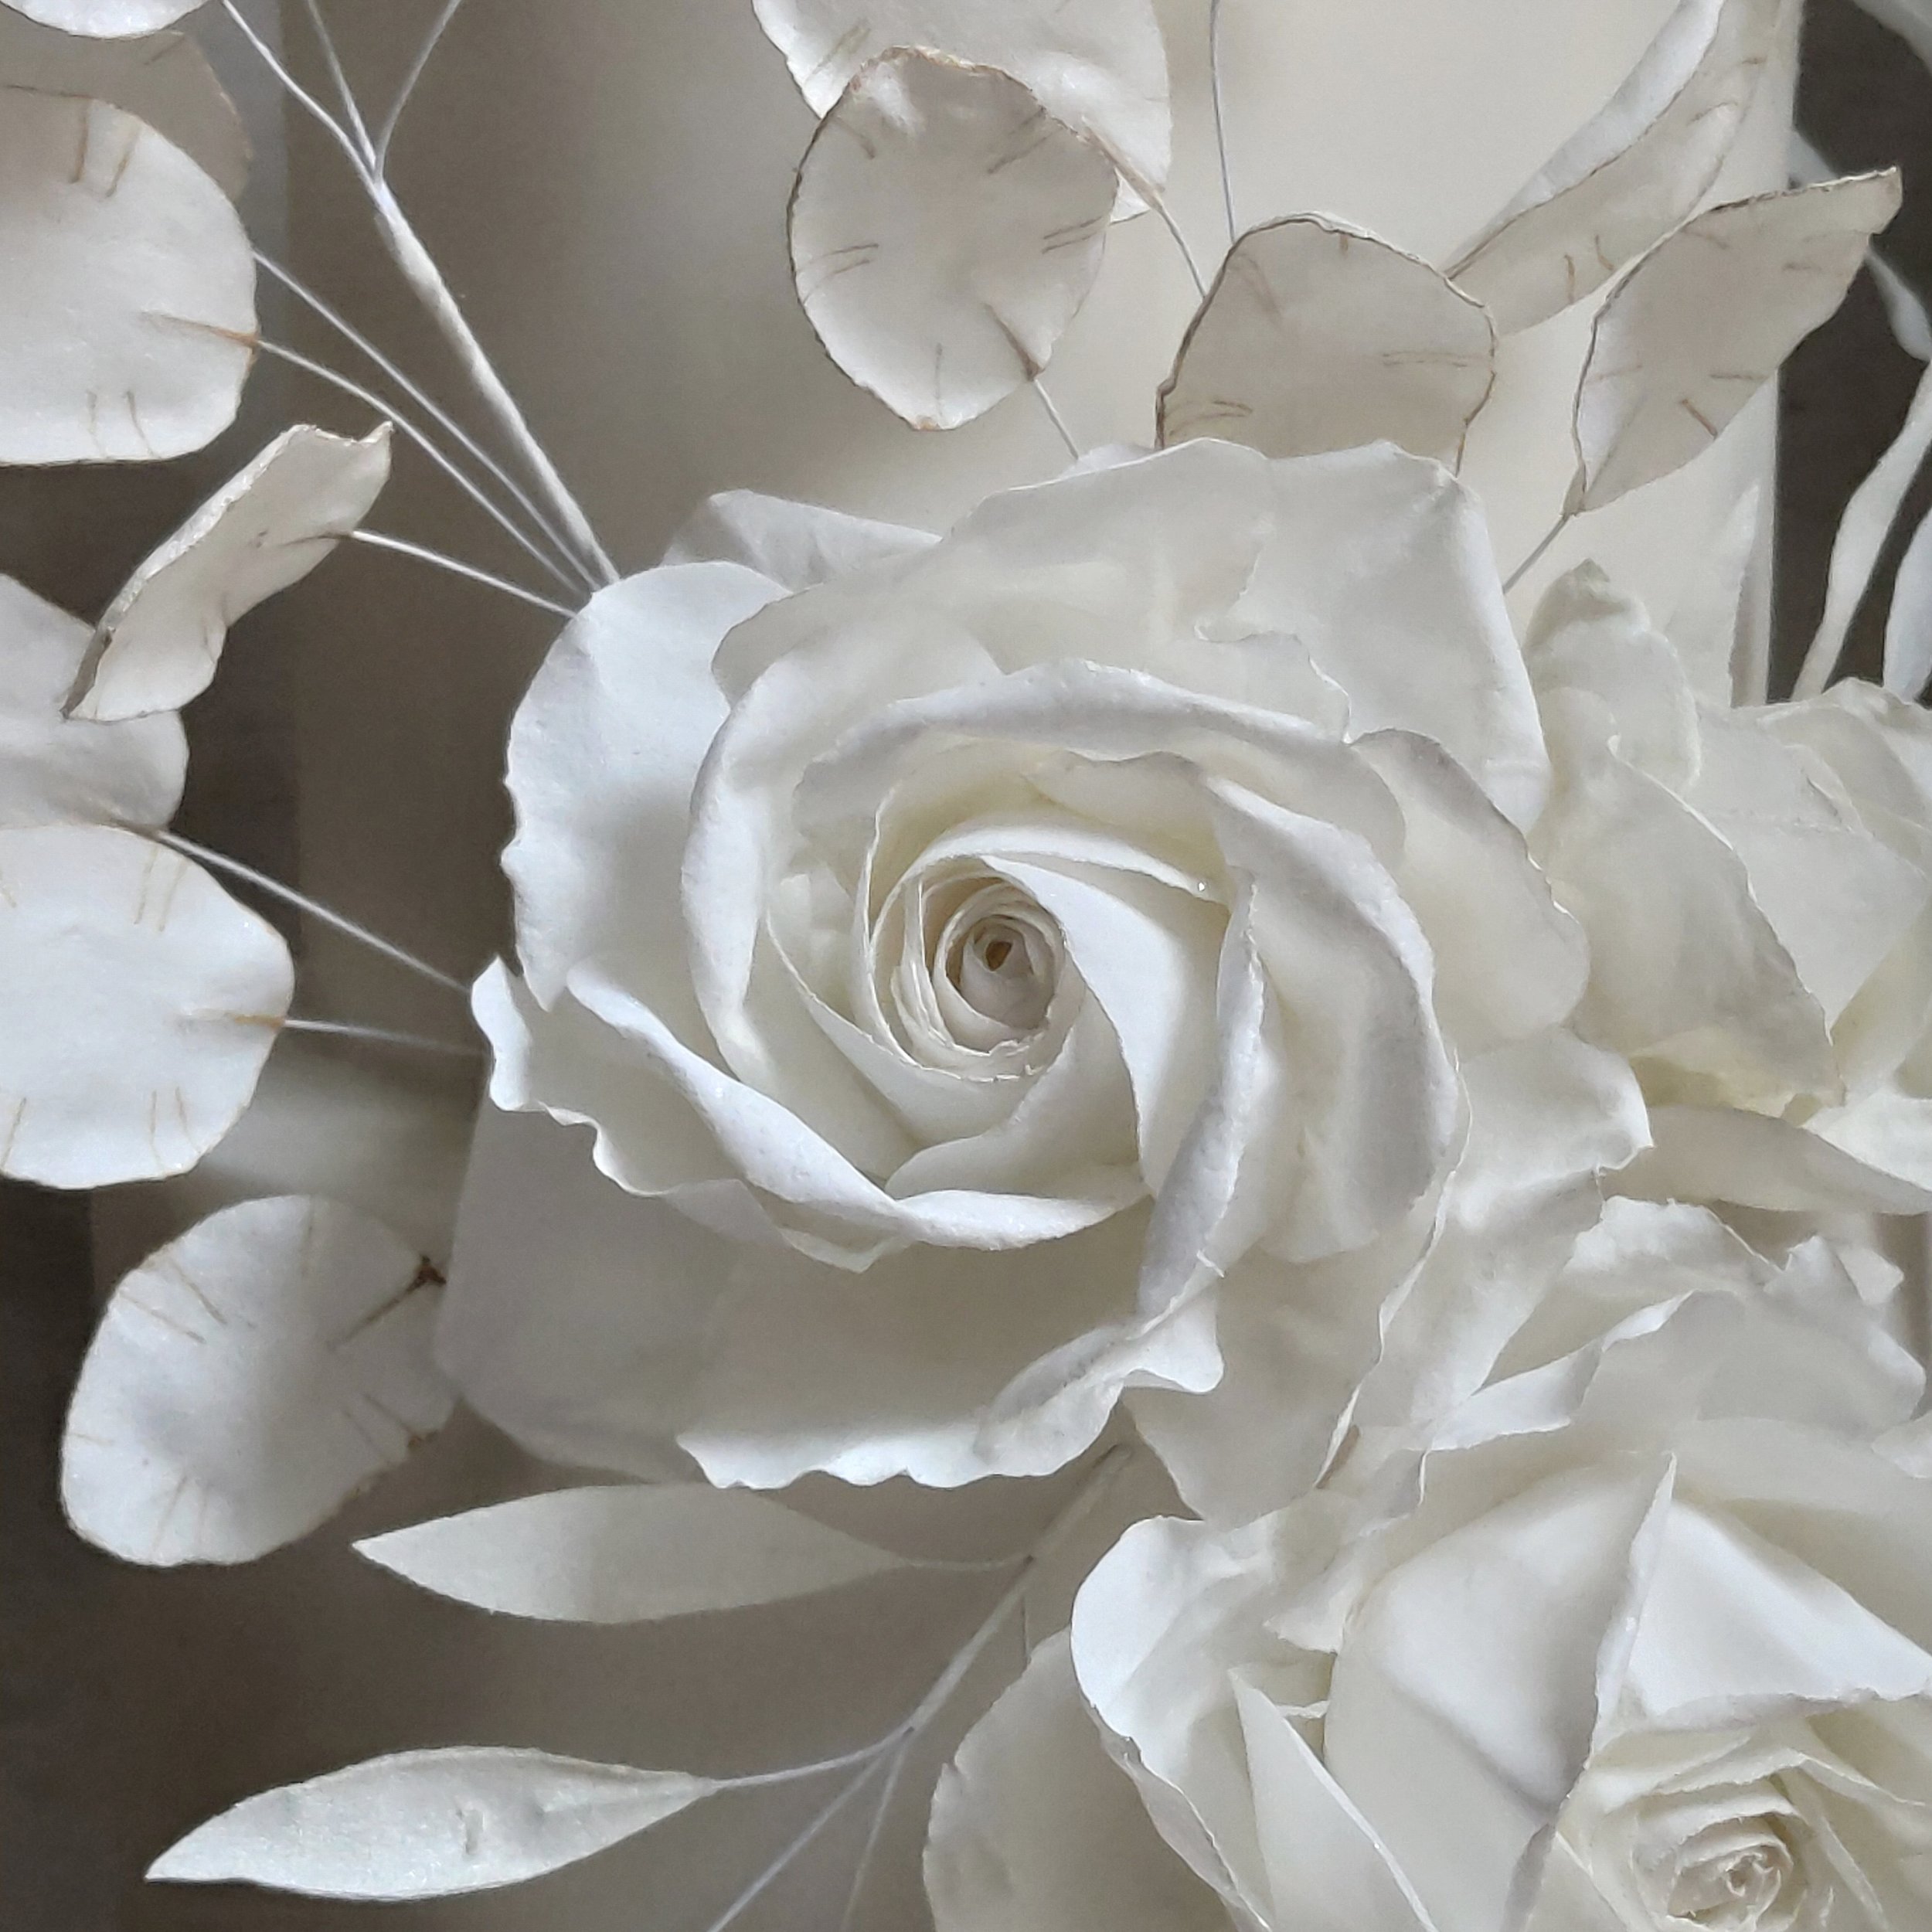 How To Make a Realistic Wafer Paper Rose